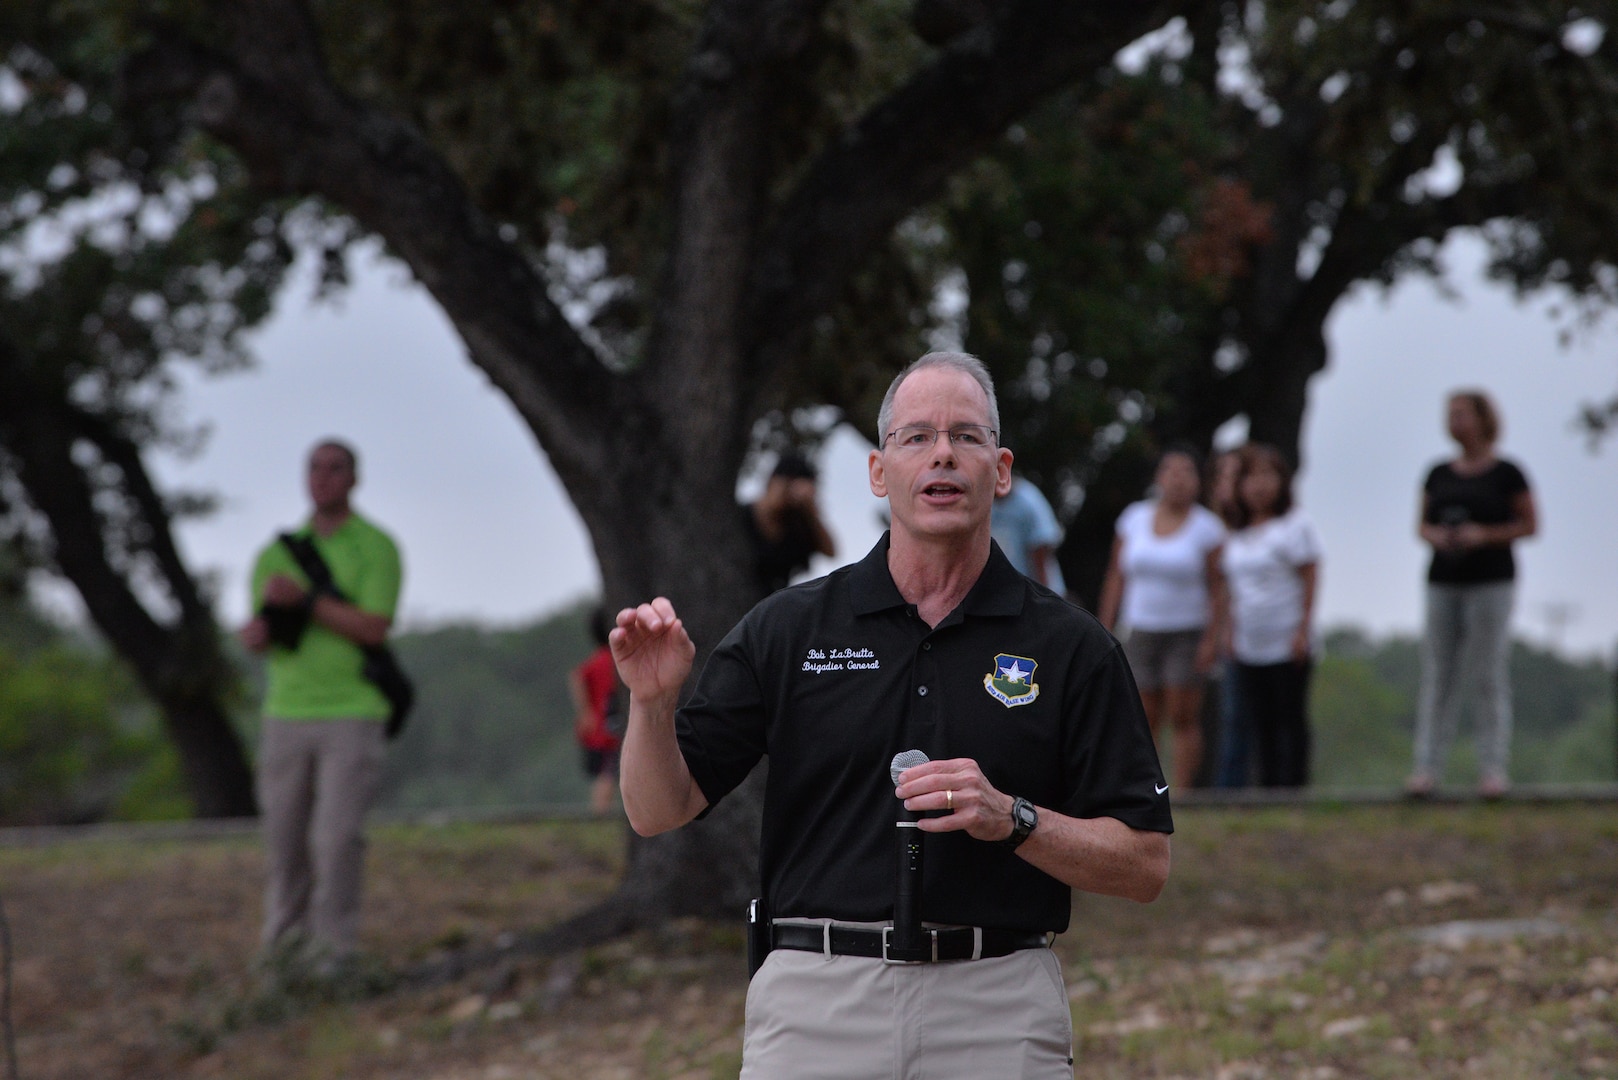 Brig. Gen. Robert D. LaBrutta, 502nd Air Base Wing and Joint Base San Antonio commander, speaks to participants prior to the Rambler 120 Race Sept. 20 at Canyon Lake, Texas. The Rambler 120 Race, which includes running, biking, rafting and a mystery event, was held at Joint Base San Antonio Recreation Park at Canyon Lake. Twenty-nine teams competed in the 22-mile bike course, 6-mile run, 2-mile rafting event and a Frisbee toss mystery event.  (U.S. Air Force photo/Desiree N. Palacios)